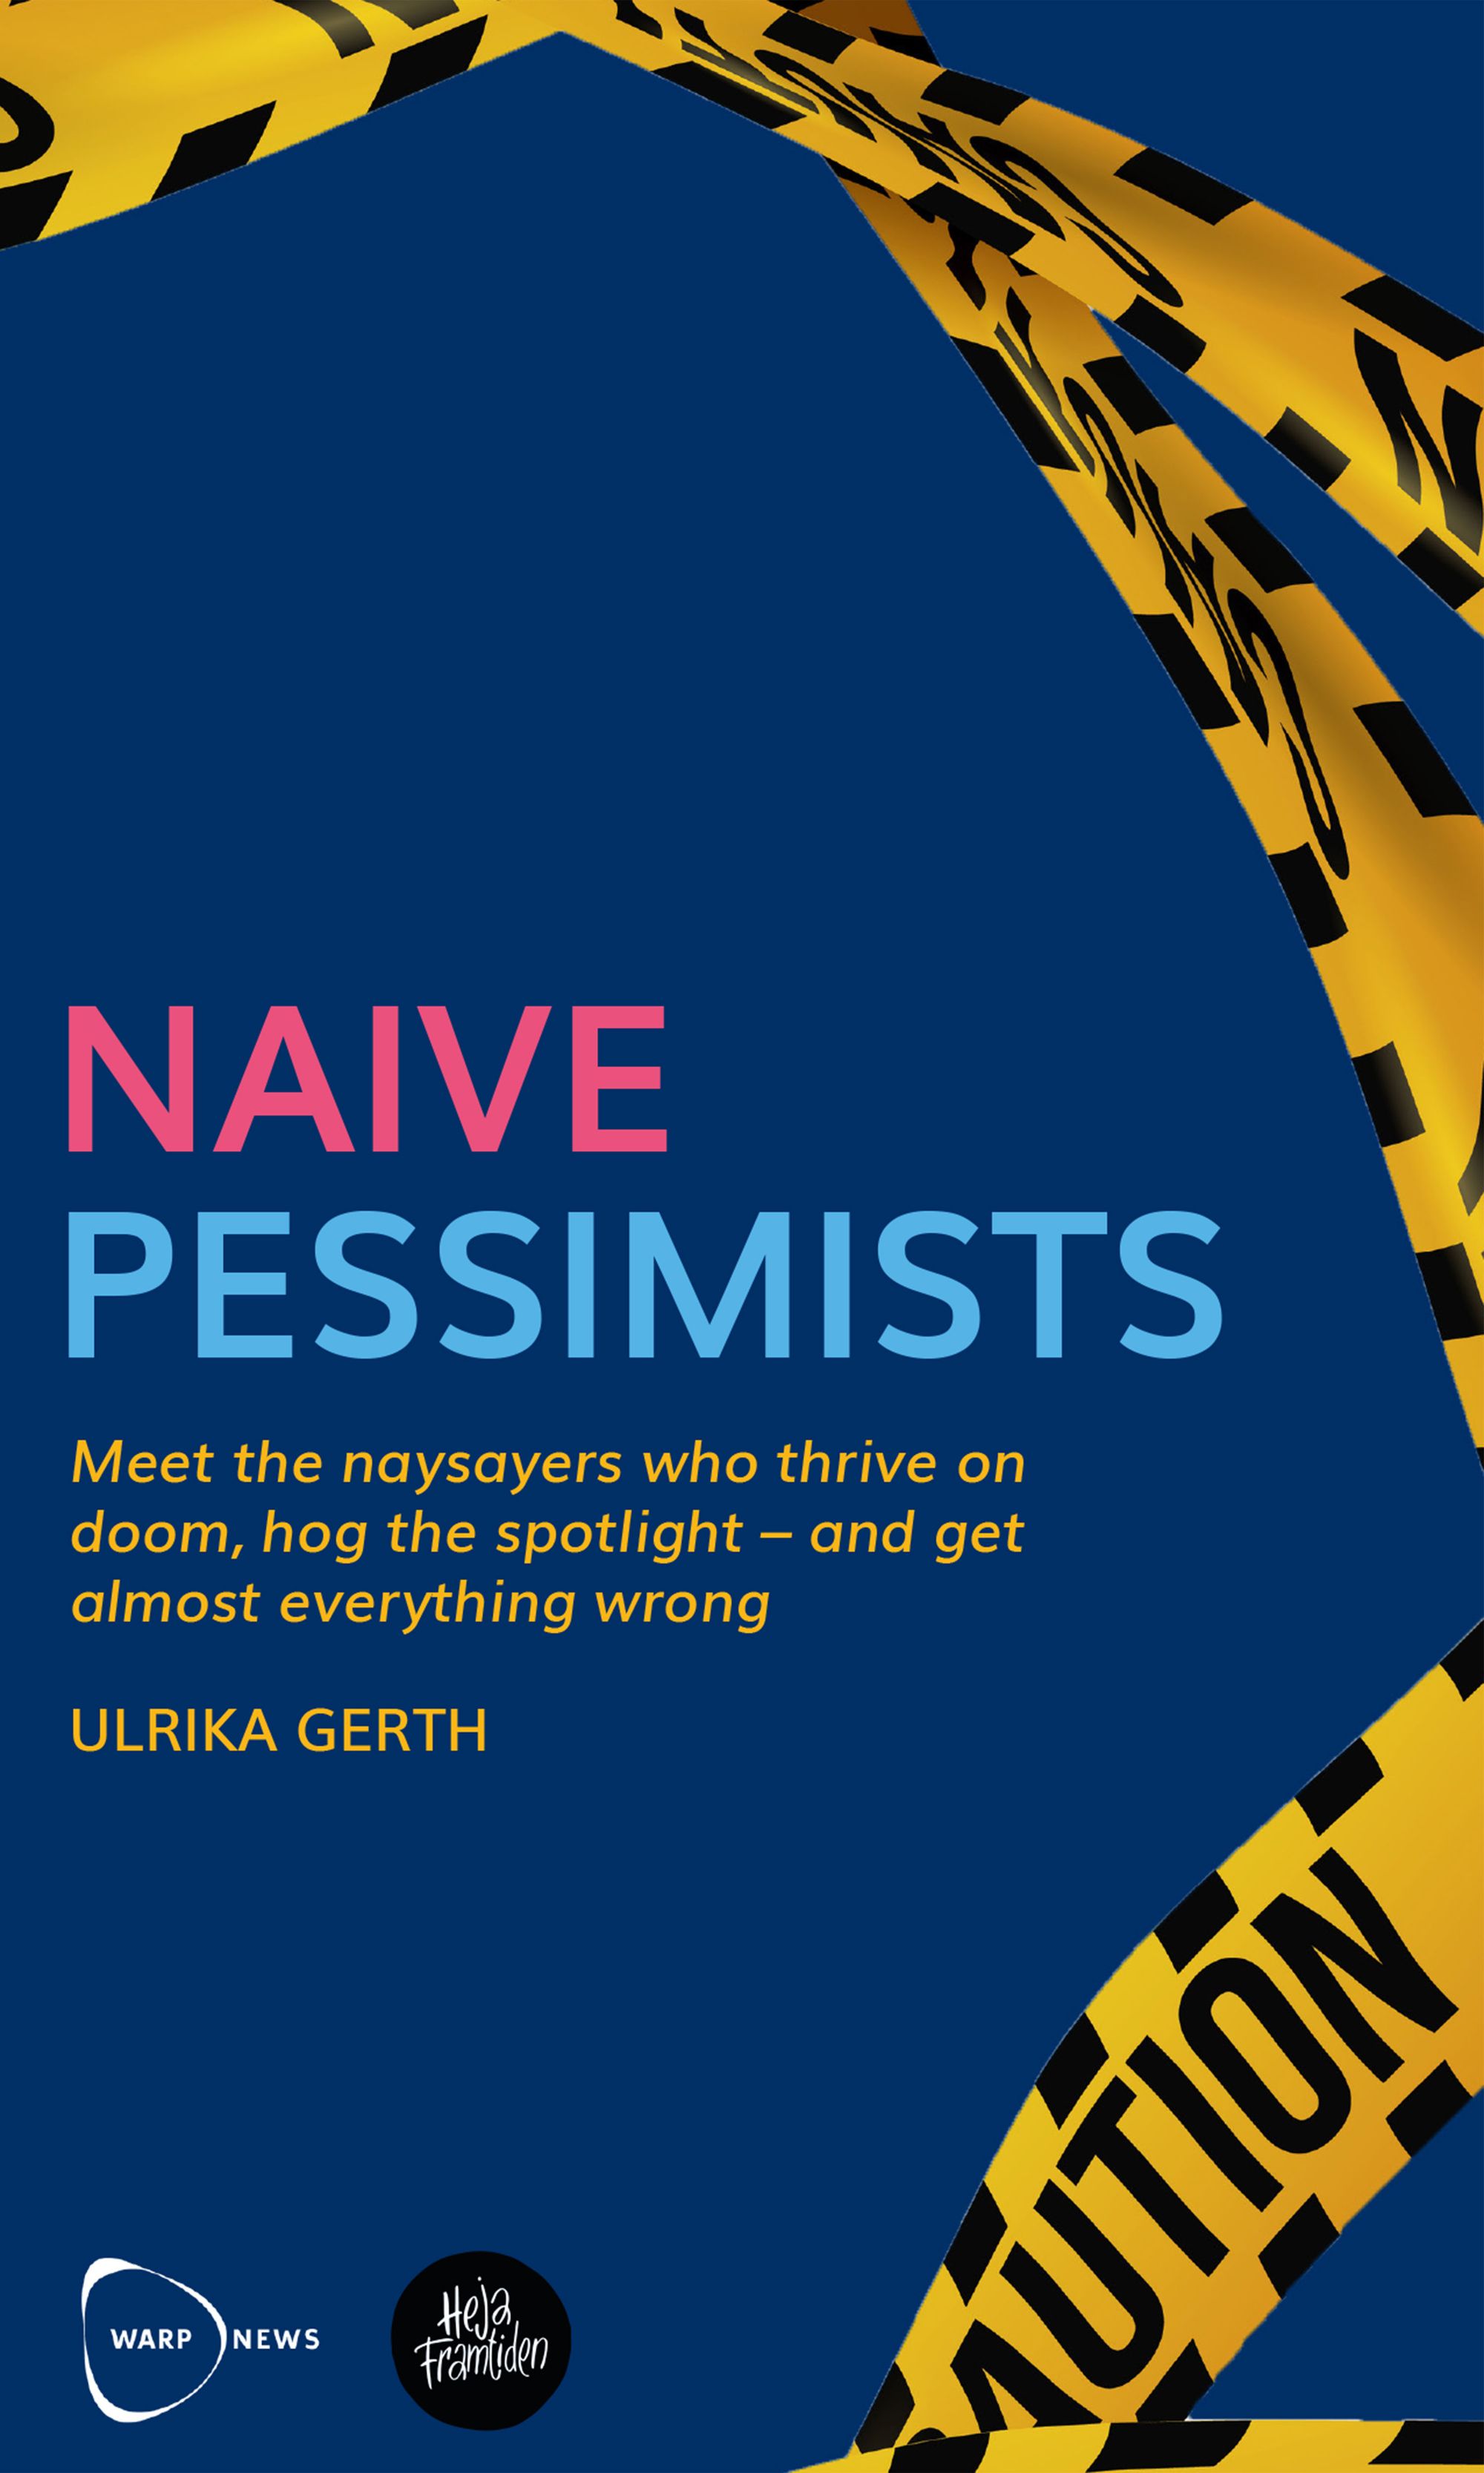 📖 Read an excerpt from Naive Pessimists